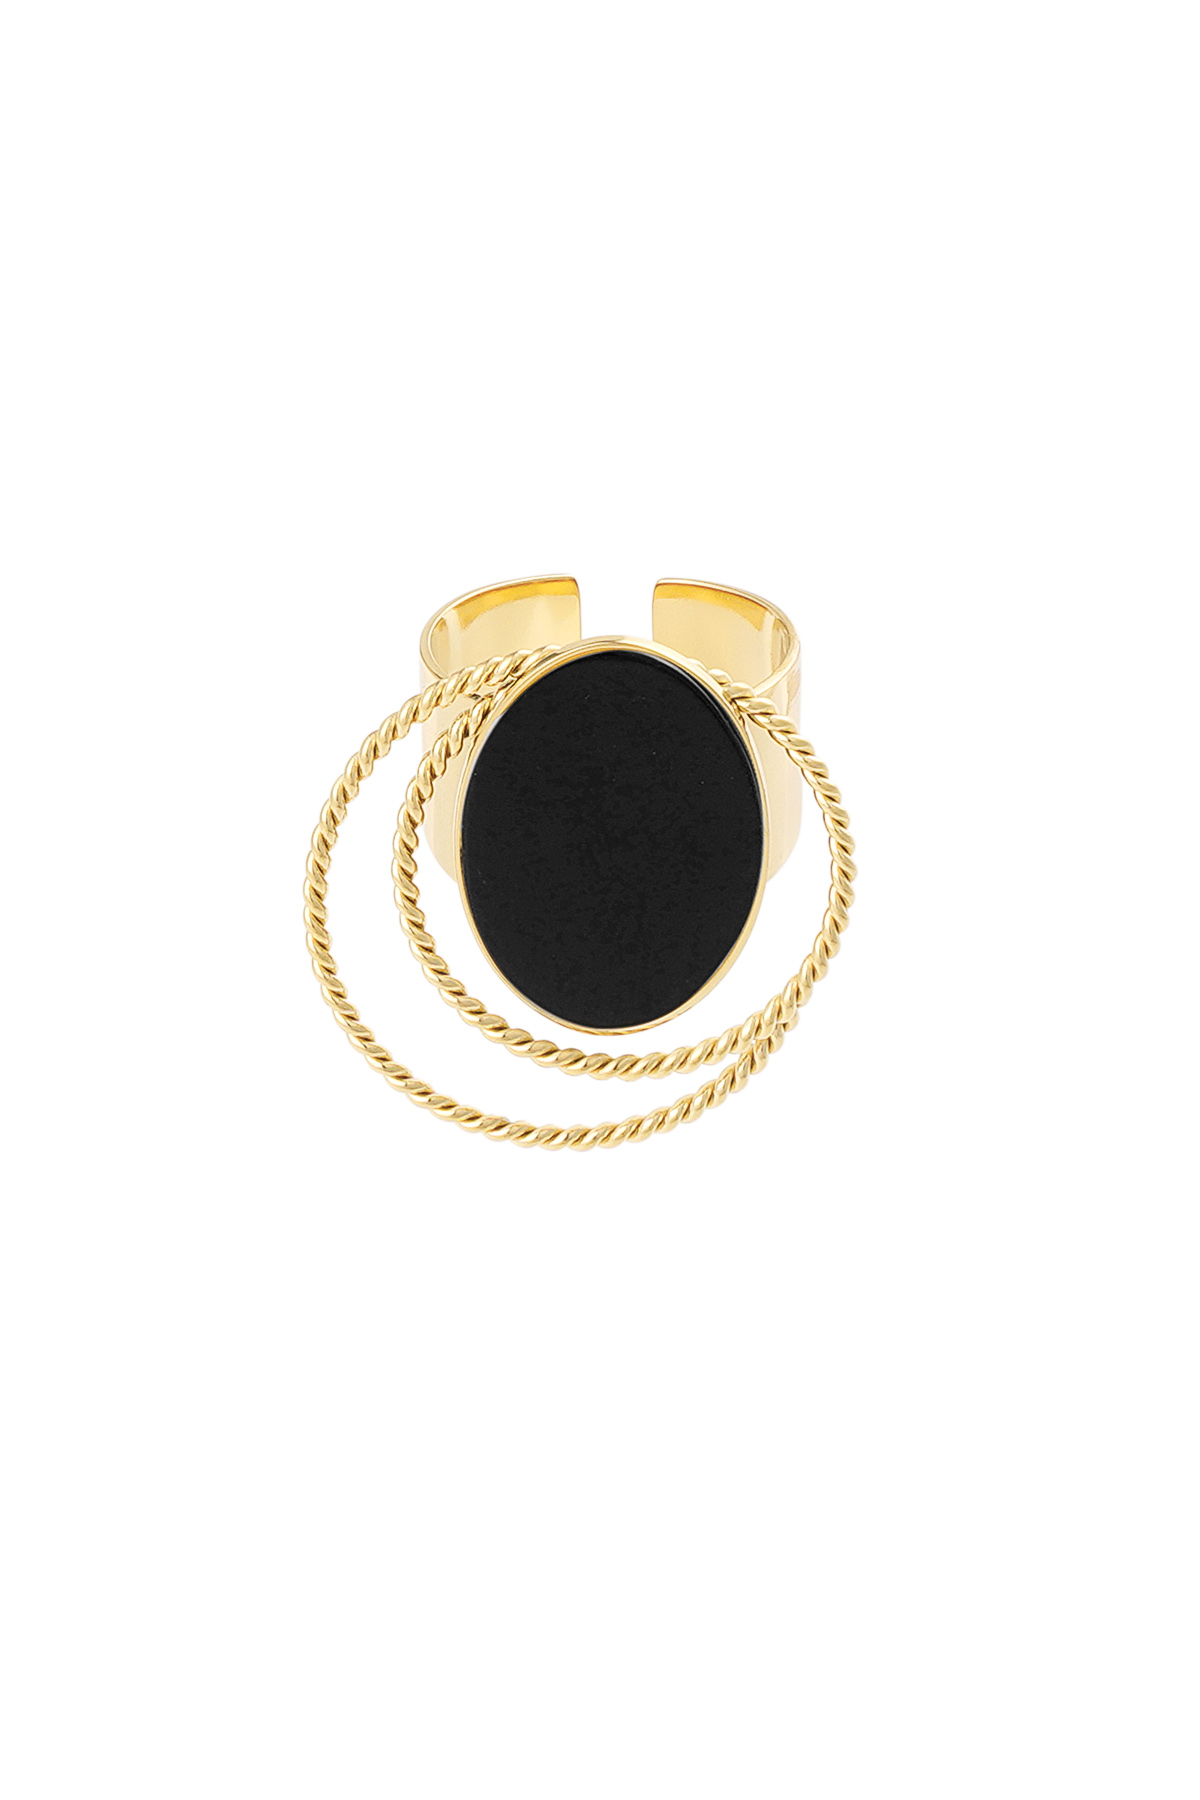 Ring stone with circles - gold/black h5 